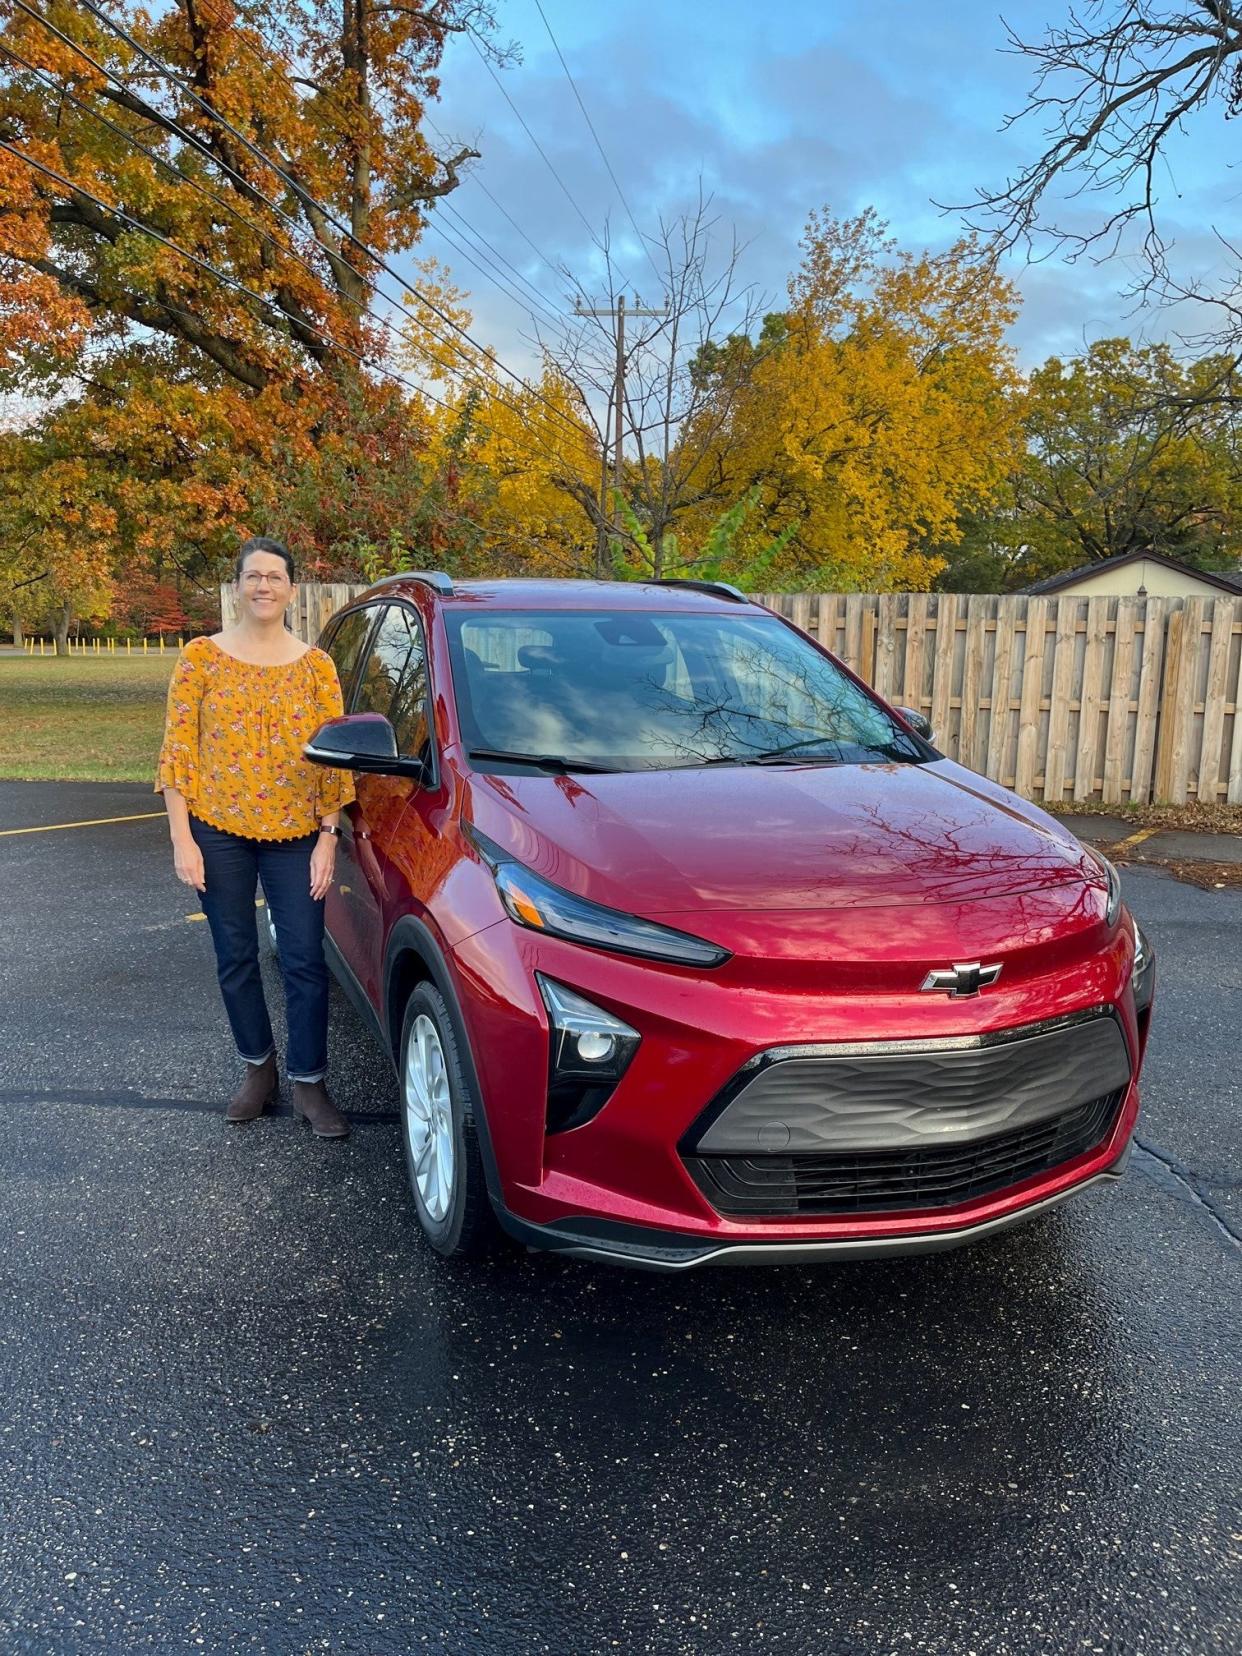 Jenny Correia, of Canton, loved her 2020 Chevy Bolt EV so much she and her husband just leased a new 2023 Bolt, despite GM’s inability to solve issues with the first car’s battery. “I’m very pleased with it so far,” Correia says.